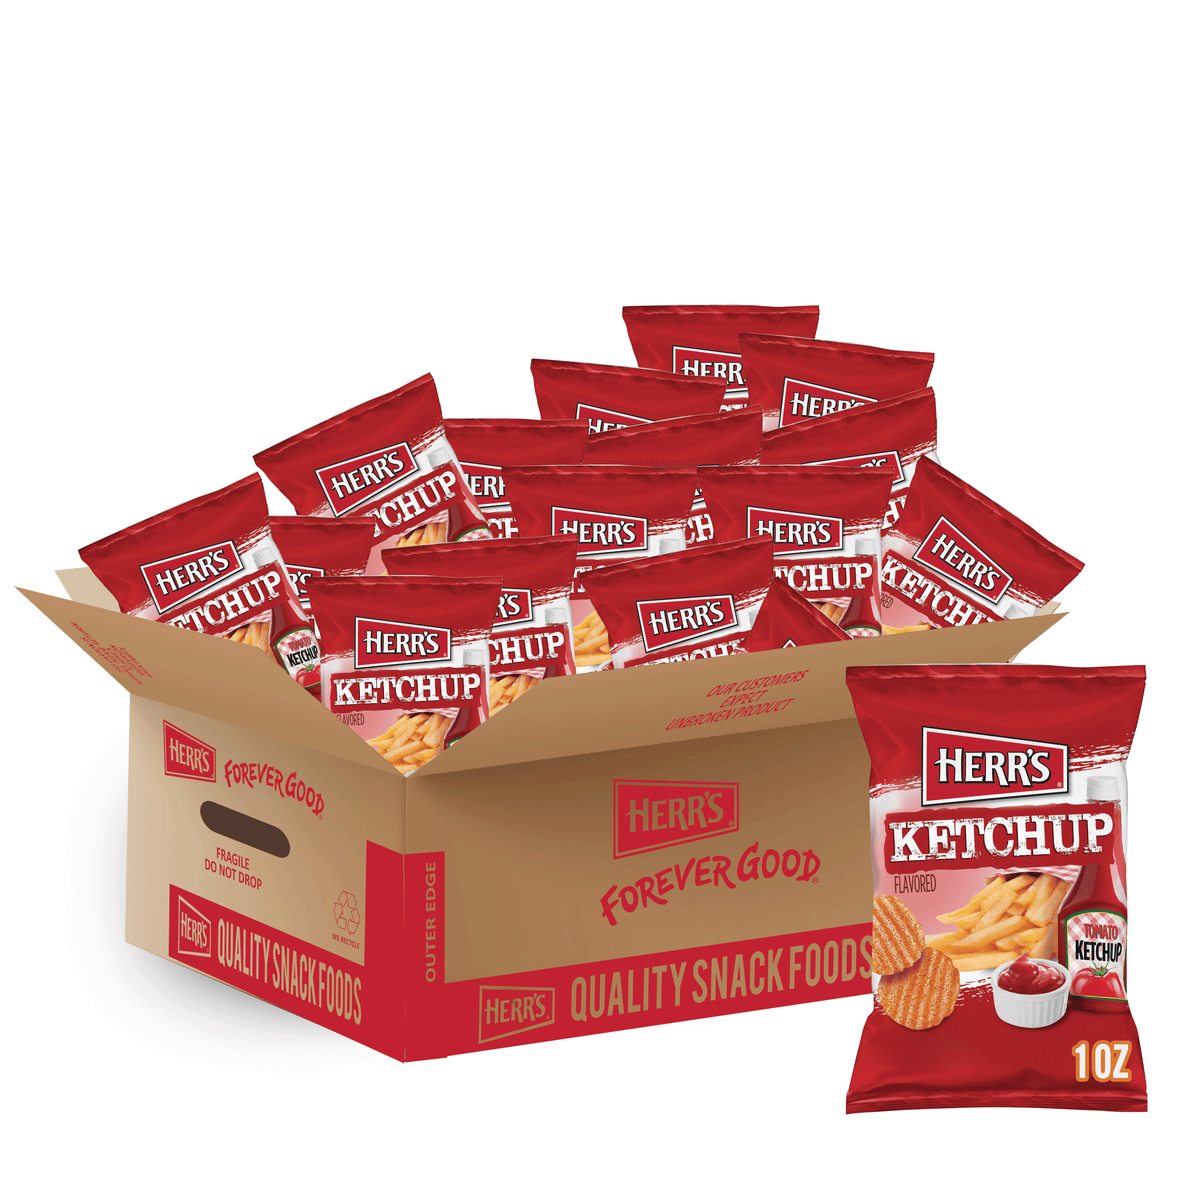 Piquante Ketchup Chips : Neal Brothers